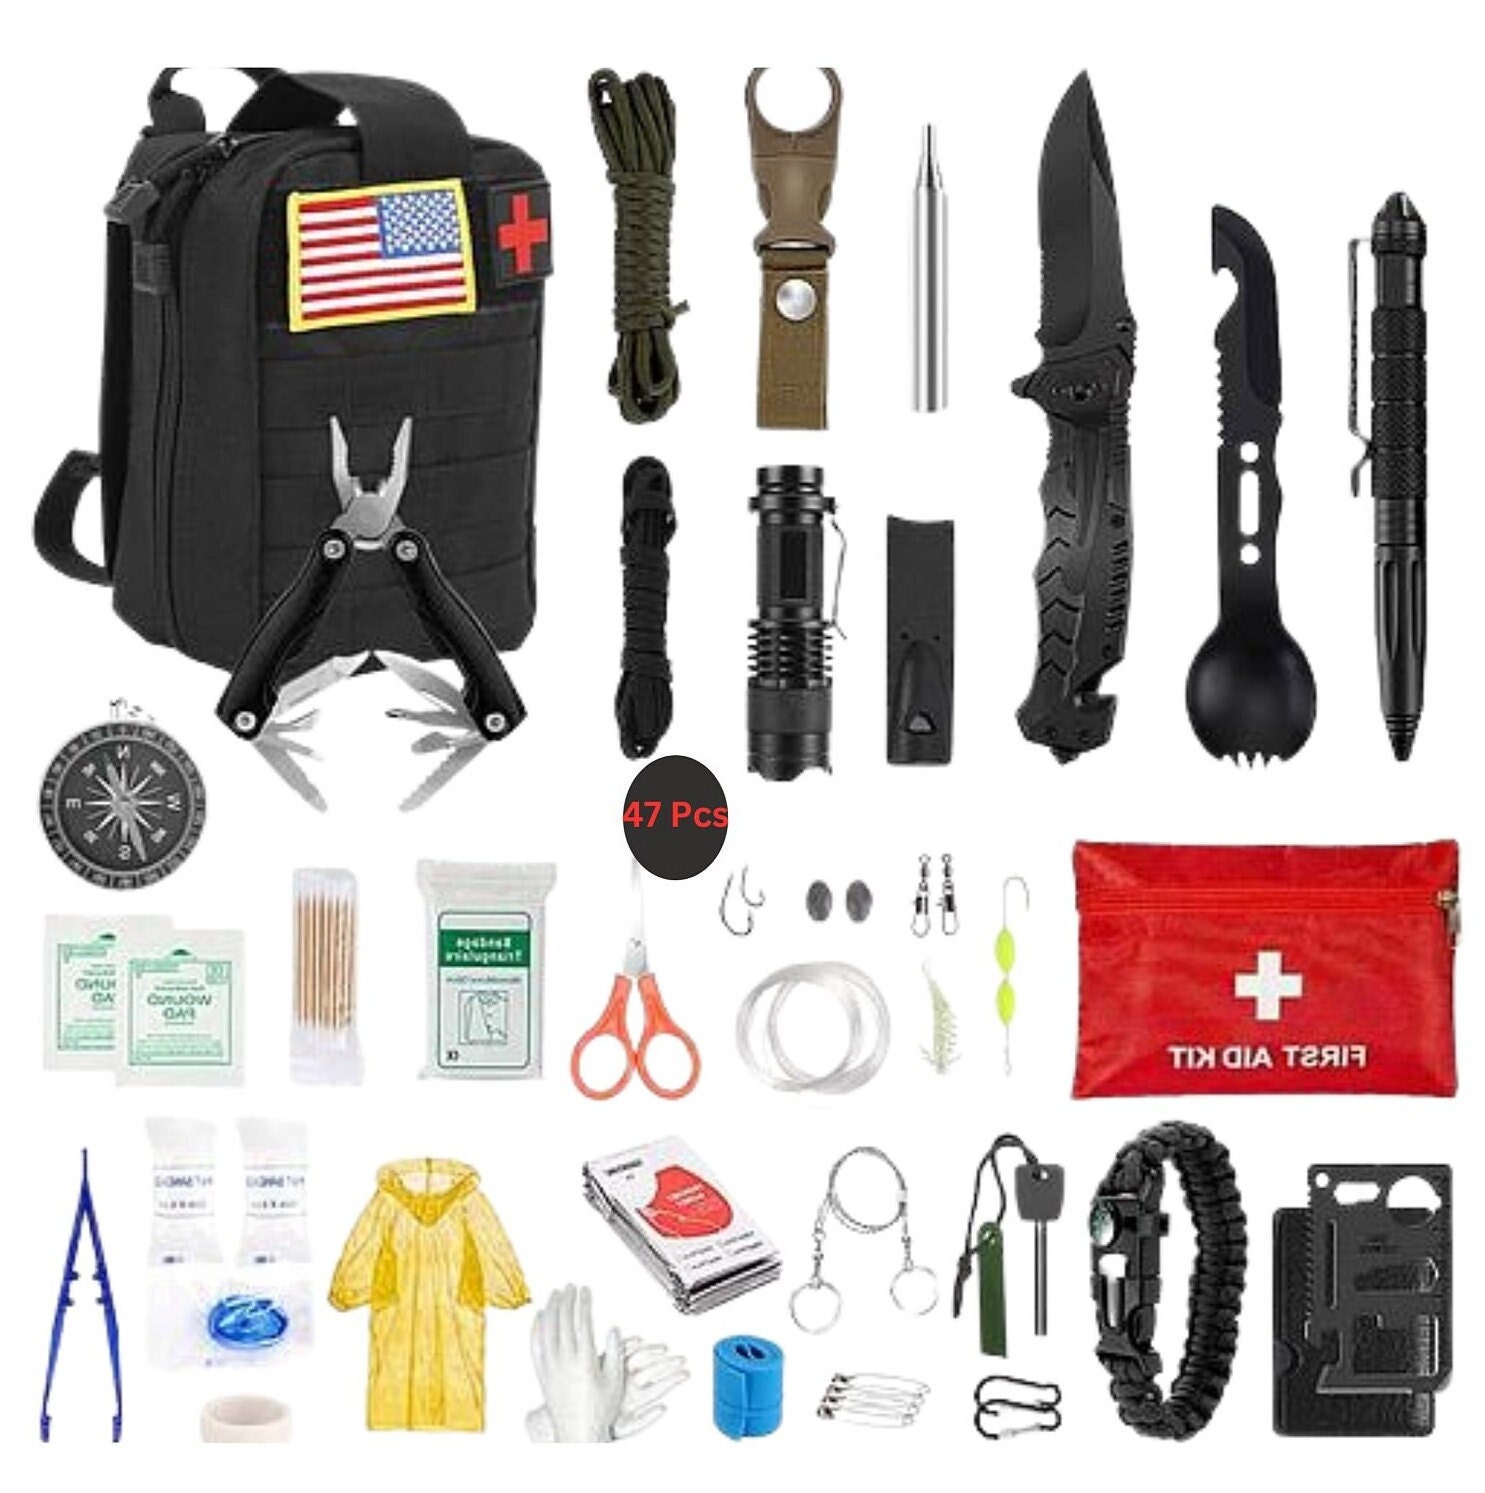 All in One Emergency Survival Kit for Camping, Hunting, Hiking, Car, RV,  Bug Out Bag Molle Pouch & American Flag Patch -  Canada